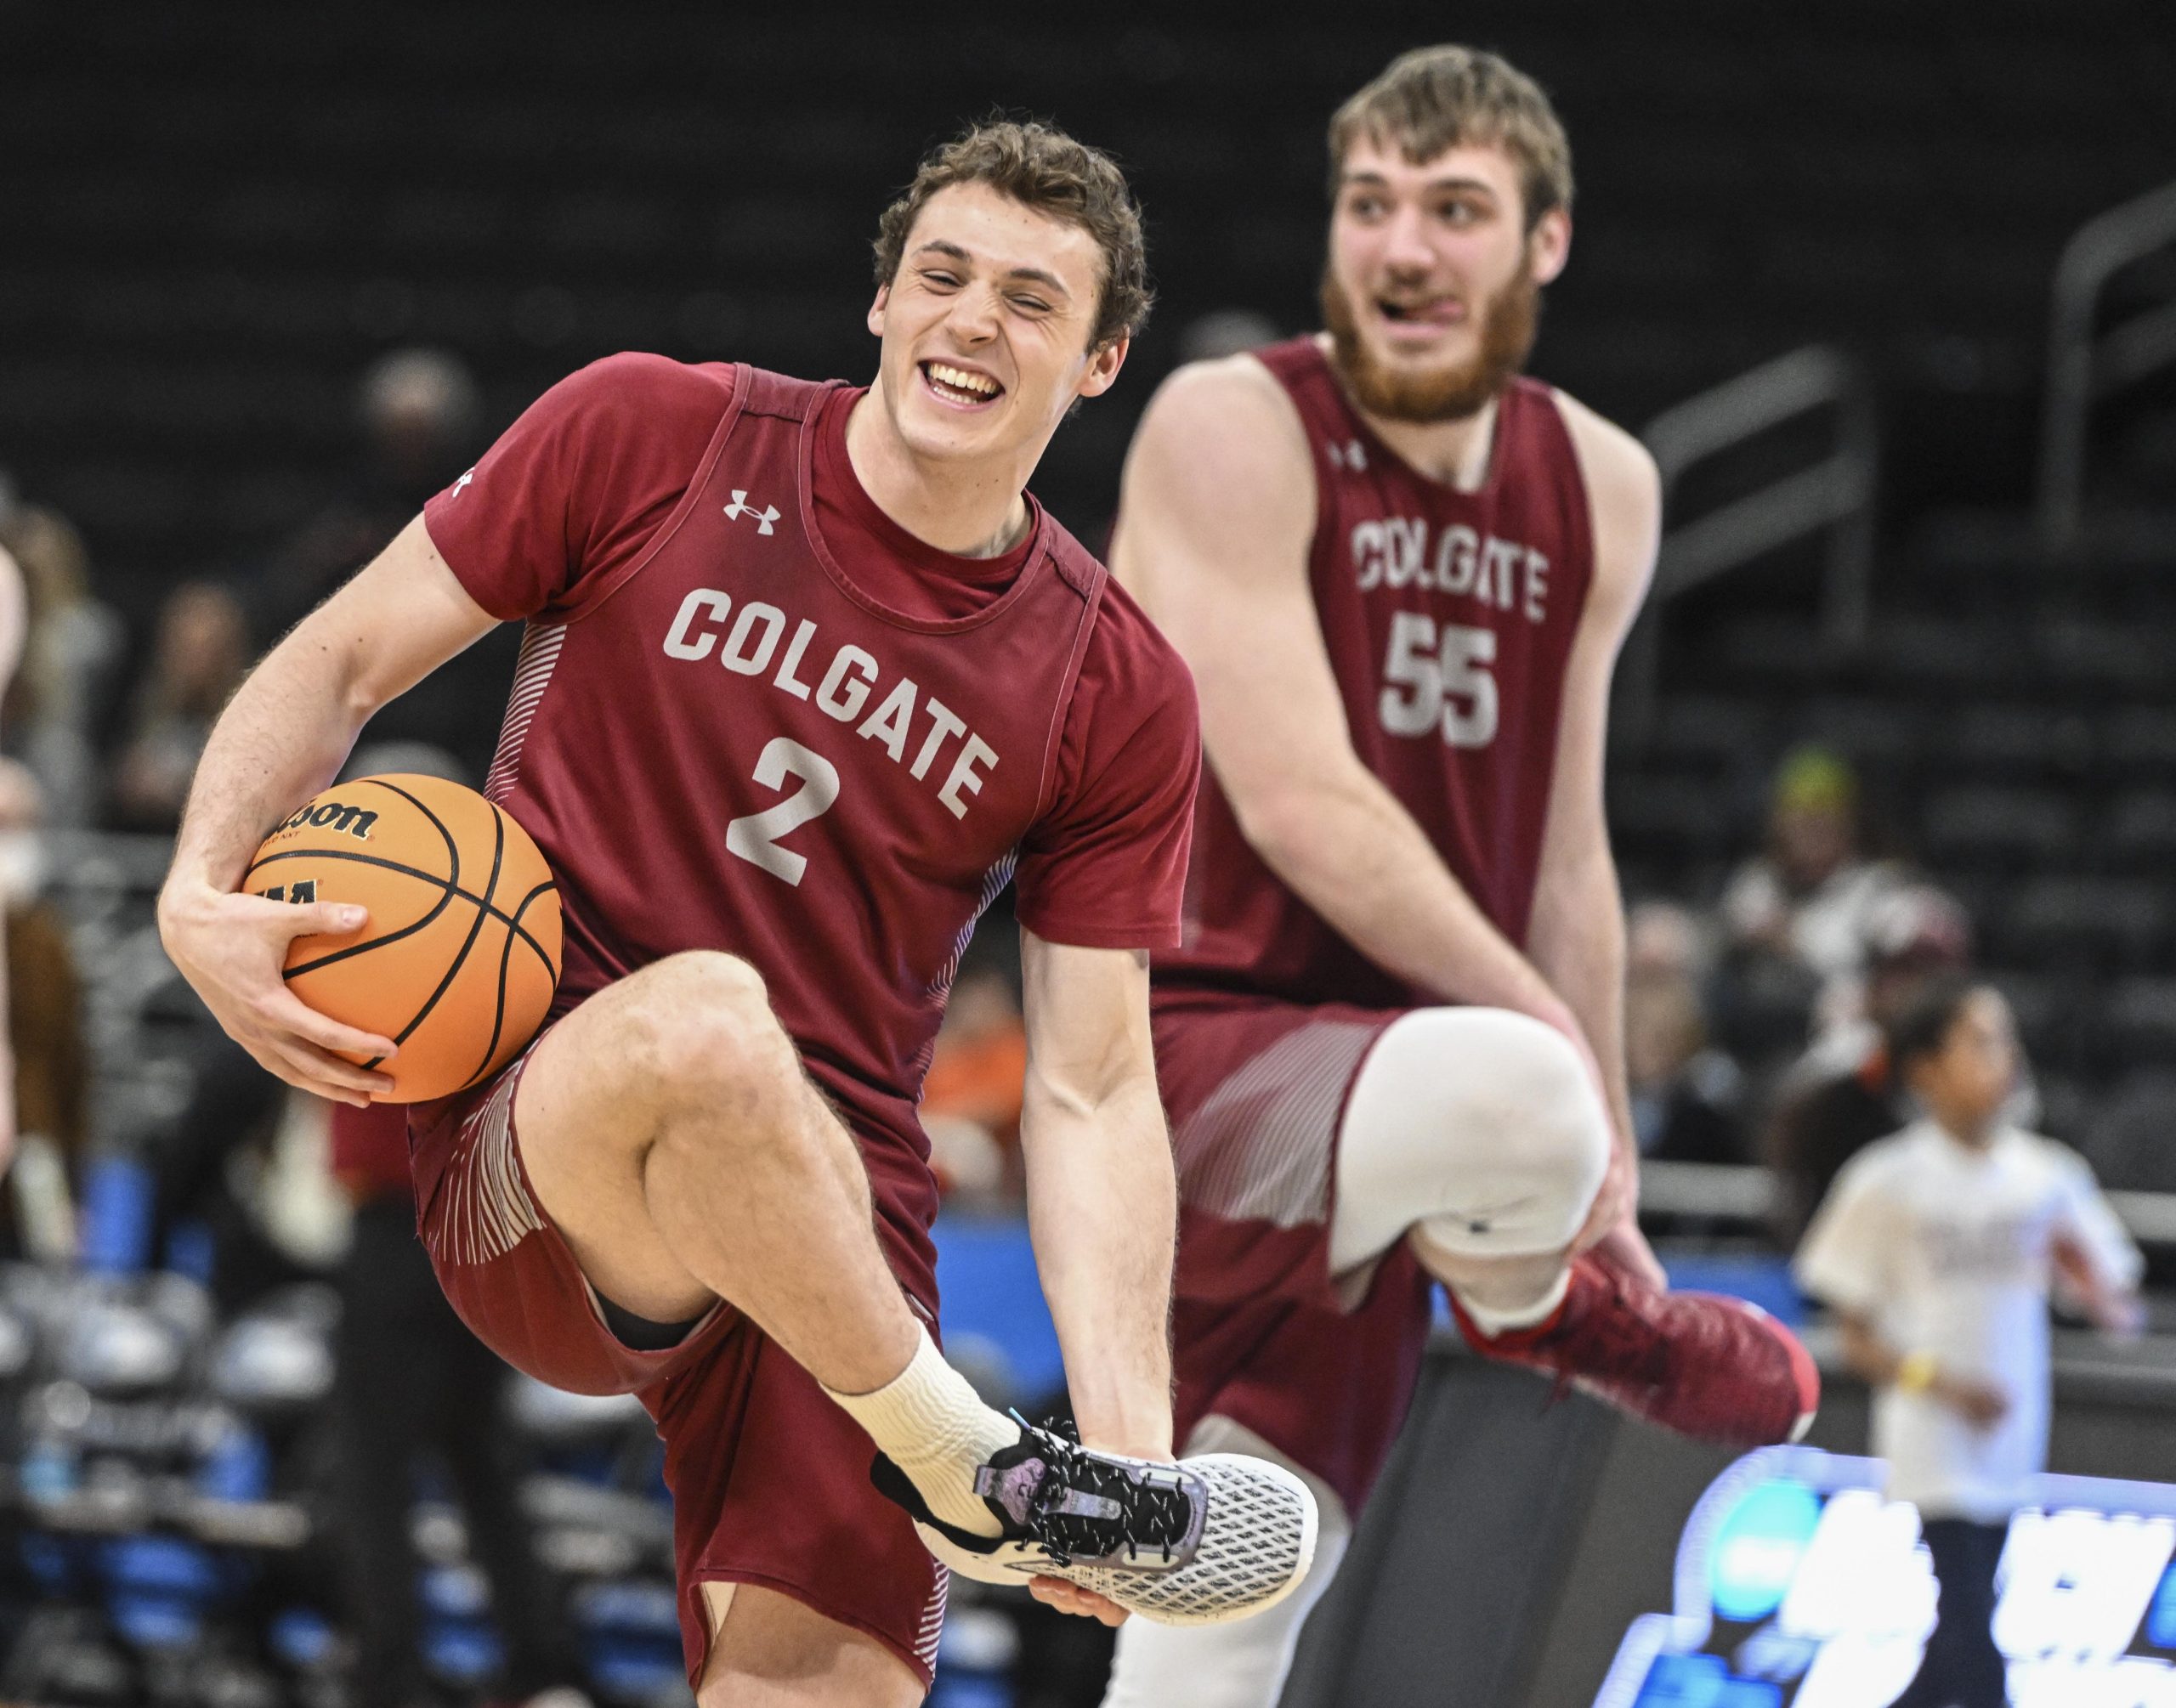 Colgate Raiders guard Zach Light (2) warms up during practice before the first round of the 2022 NCAA Tournament at Fiserv Forum. Mandatory Credit: Benny Sieu-USA TODAY Sports